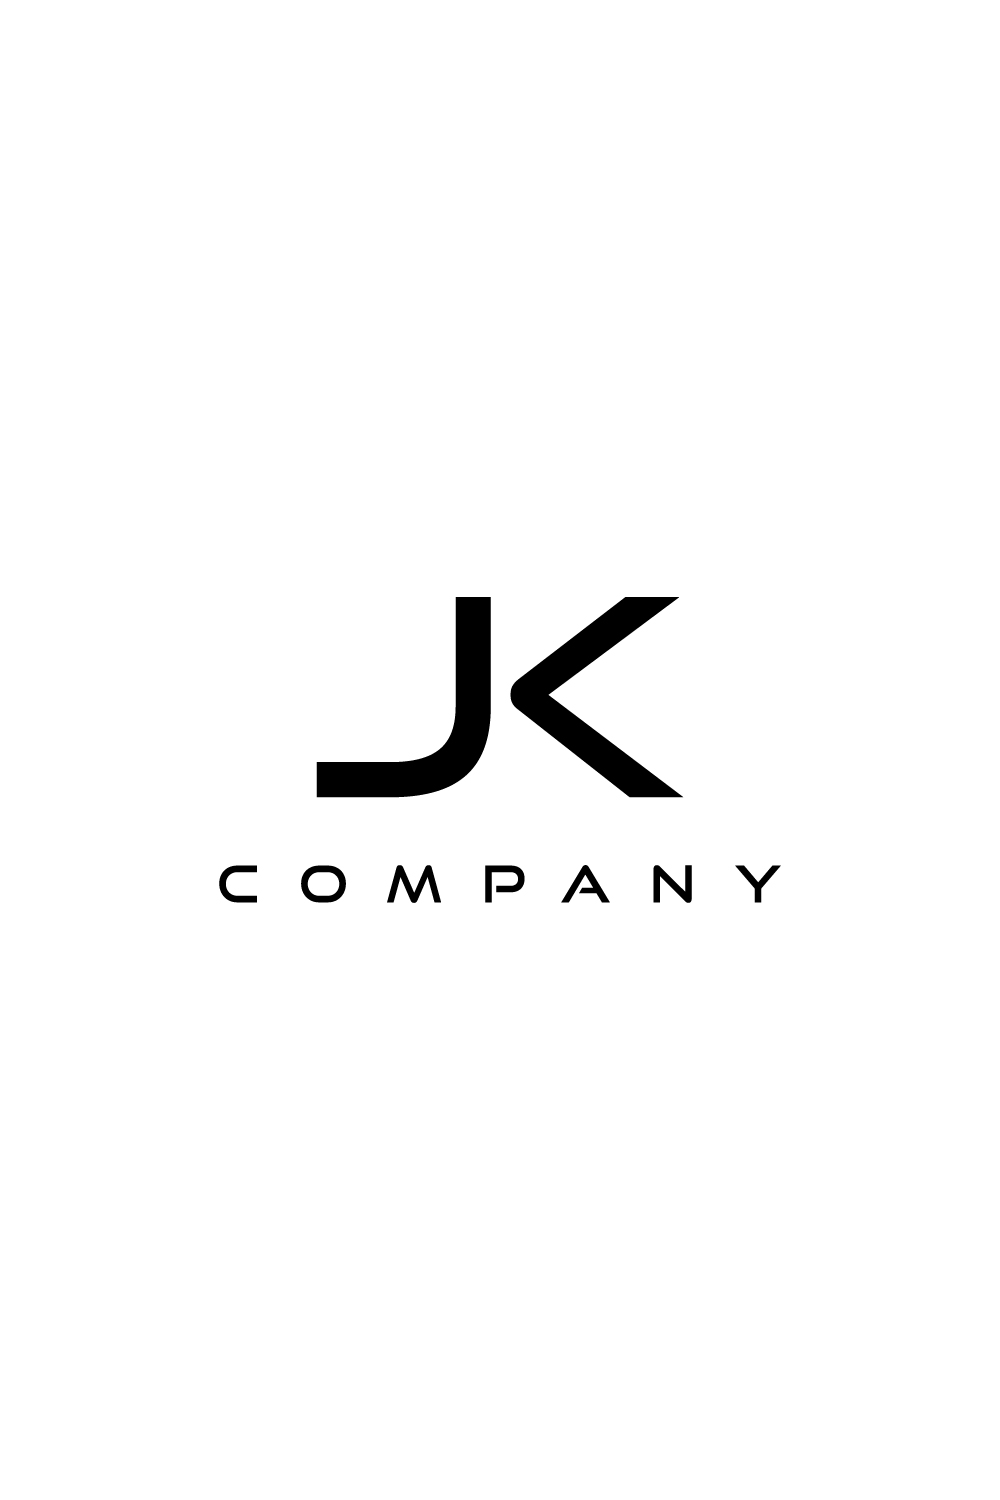 Abstract JK letter mark logo with a modern look pinterest preview image.